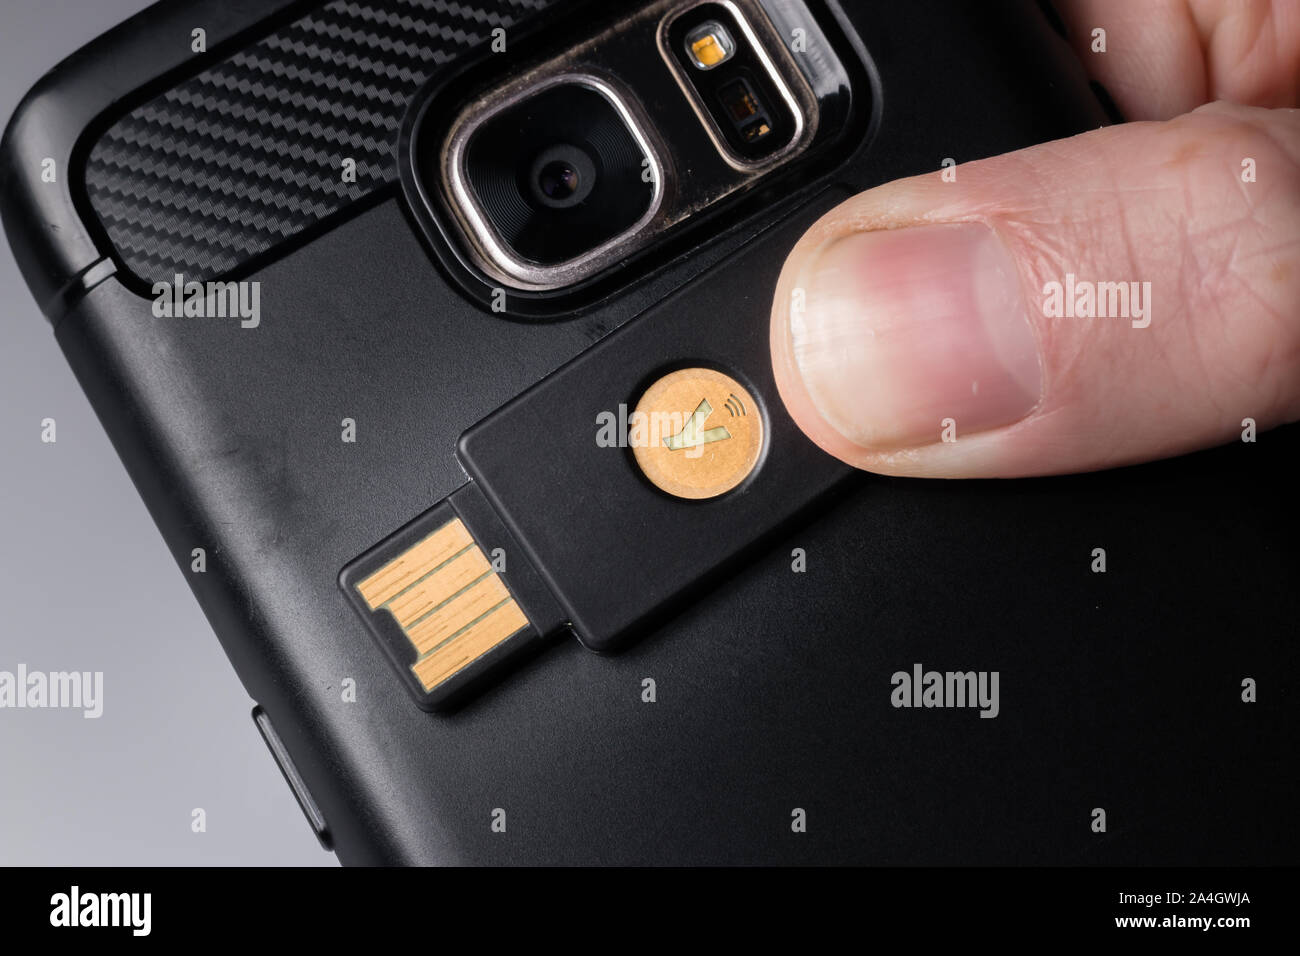 A Yubikey 5 security key using NFC to connect to a smartphone Stock Photo